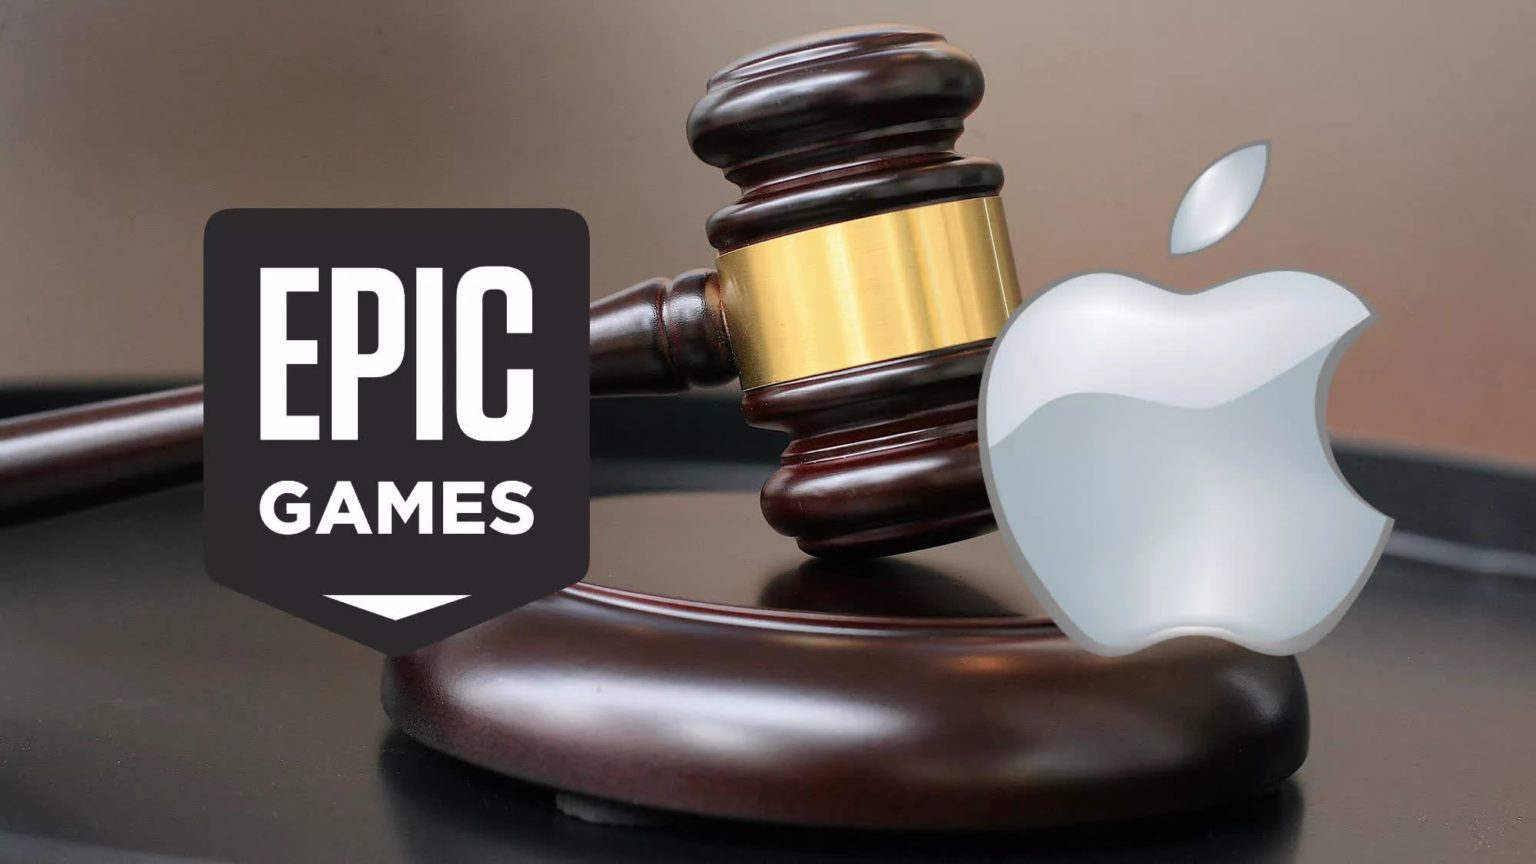 Microsoft, Meta, X, and Spotify file legal brief supporting Epic Games fight against Apple